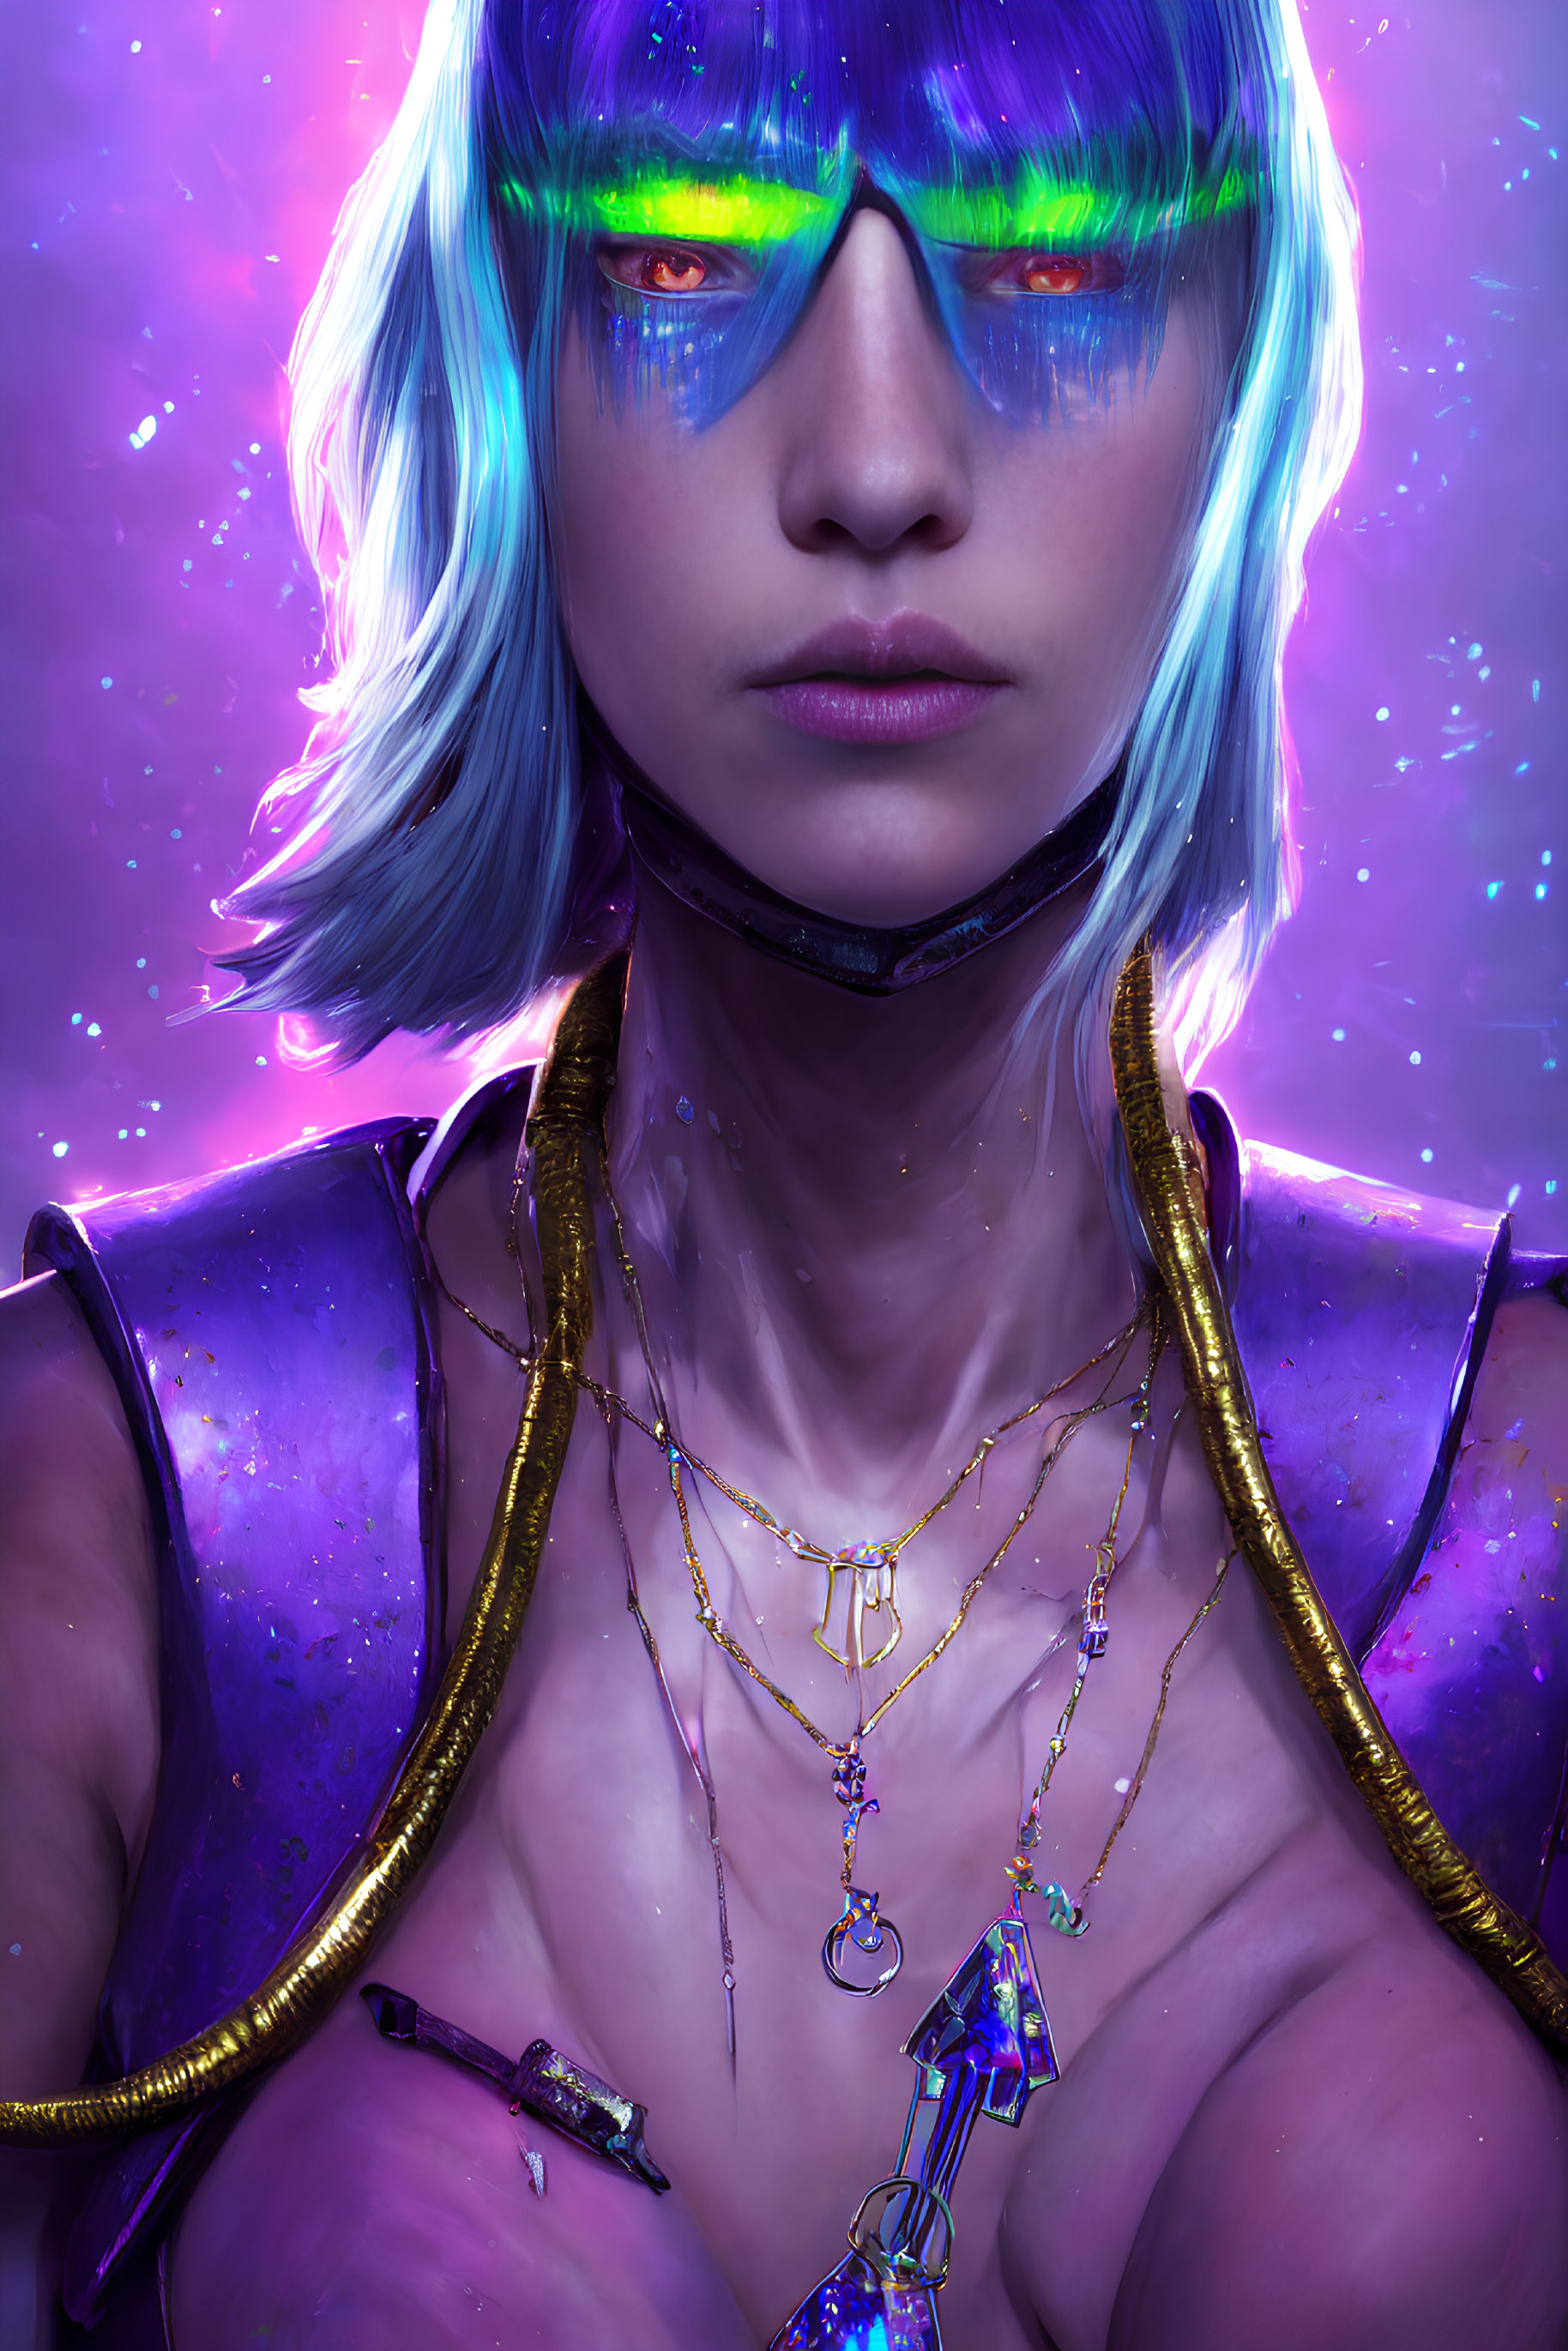 Digital portrait: Woman with blue hair and glowing visor glasses in cosmic setting.